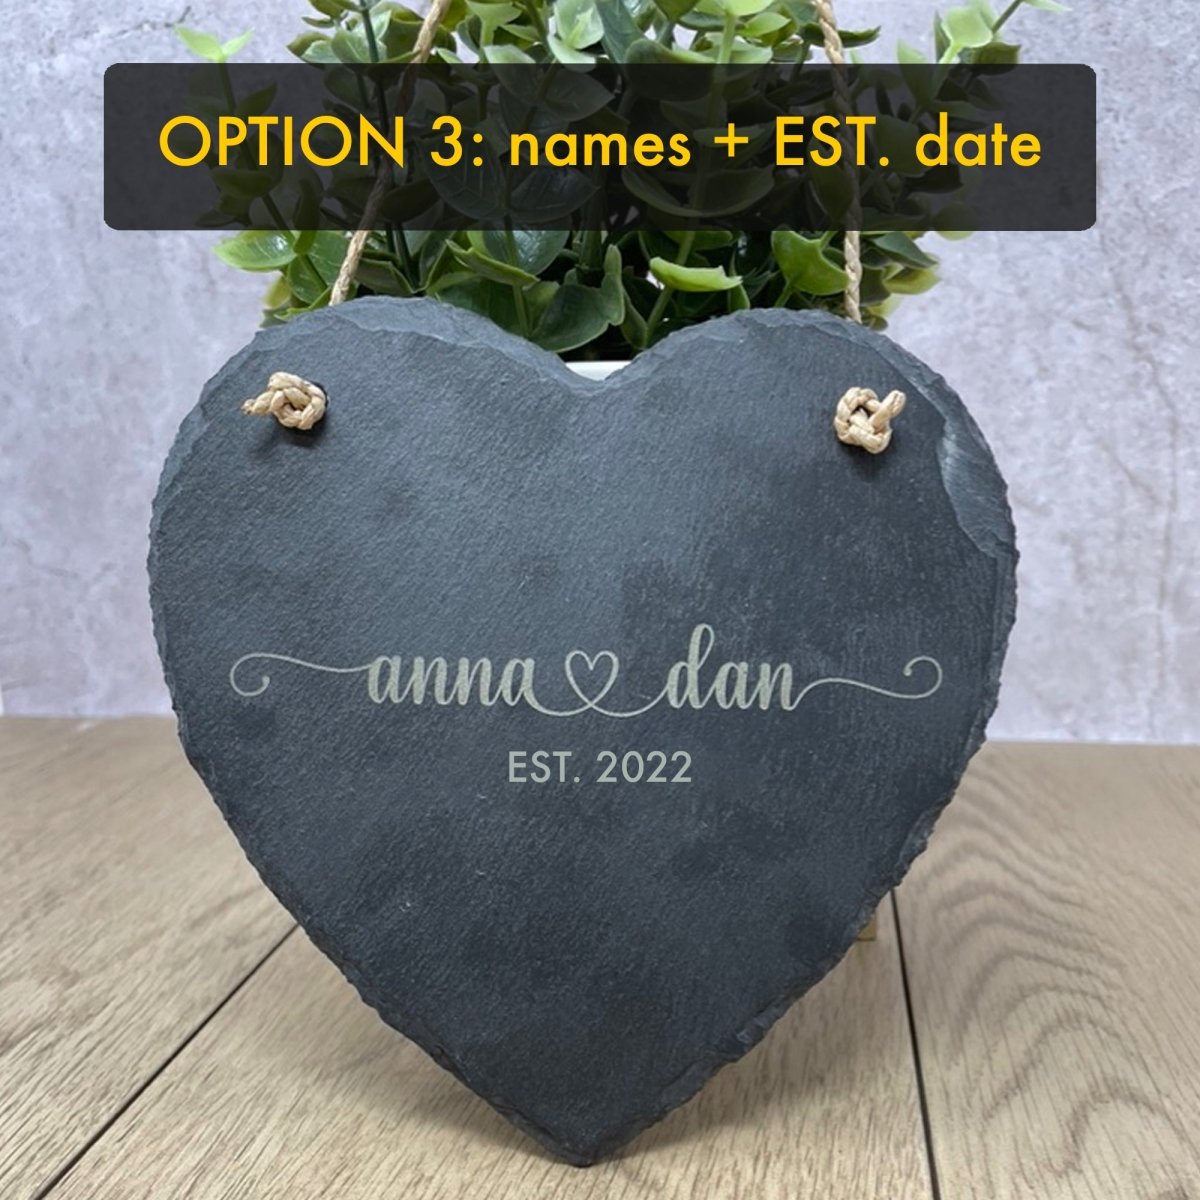 Personalised Slate Plaque Heart Shaped Plaque Engraved Valentines Gift 15x15cm Personalised 3. Names + EST. date  Accessories Gifts UK